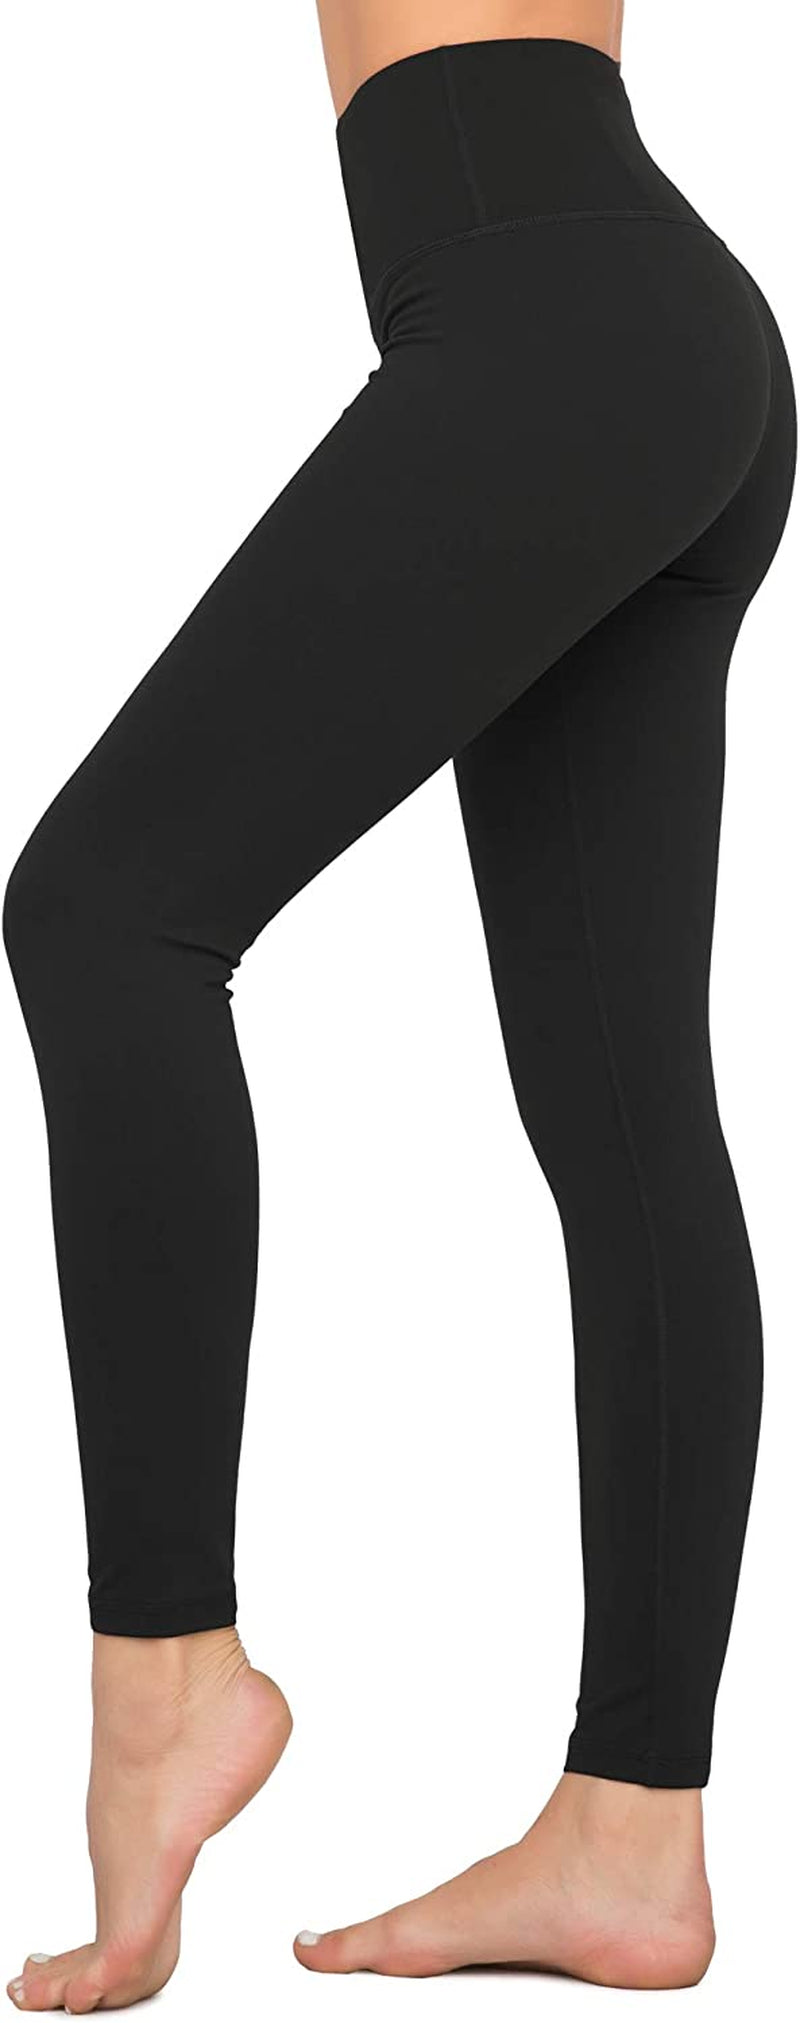 Buy SHAPERX Women's Tummy Control Yoga Pants with High Waist and